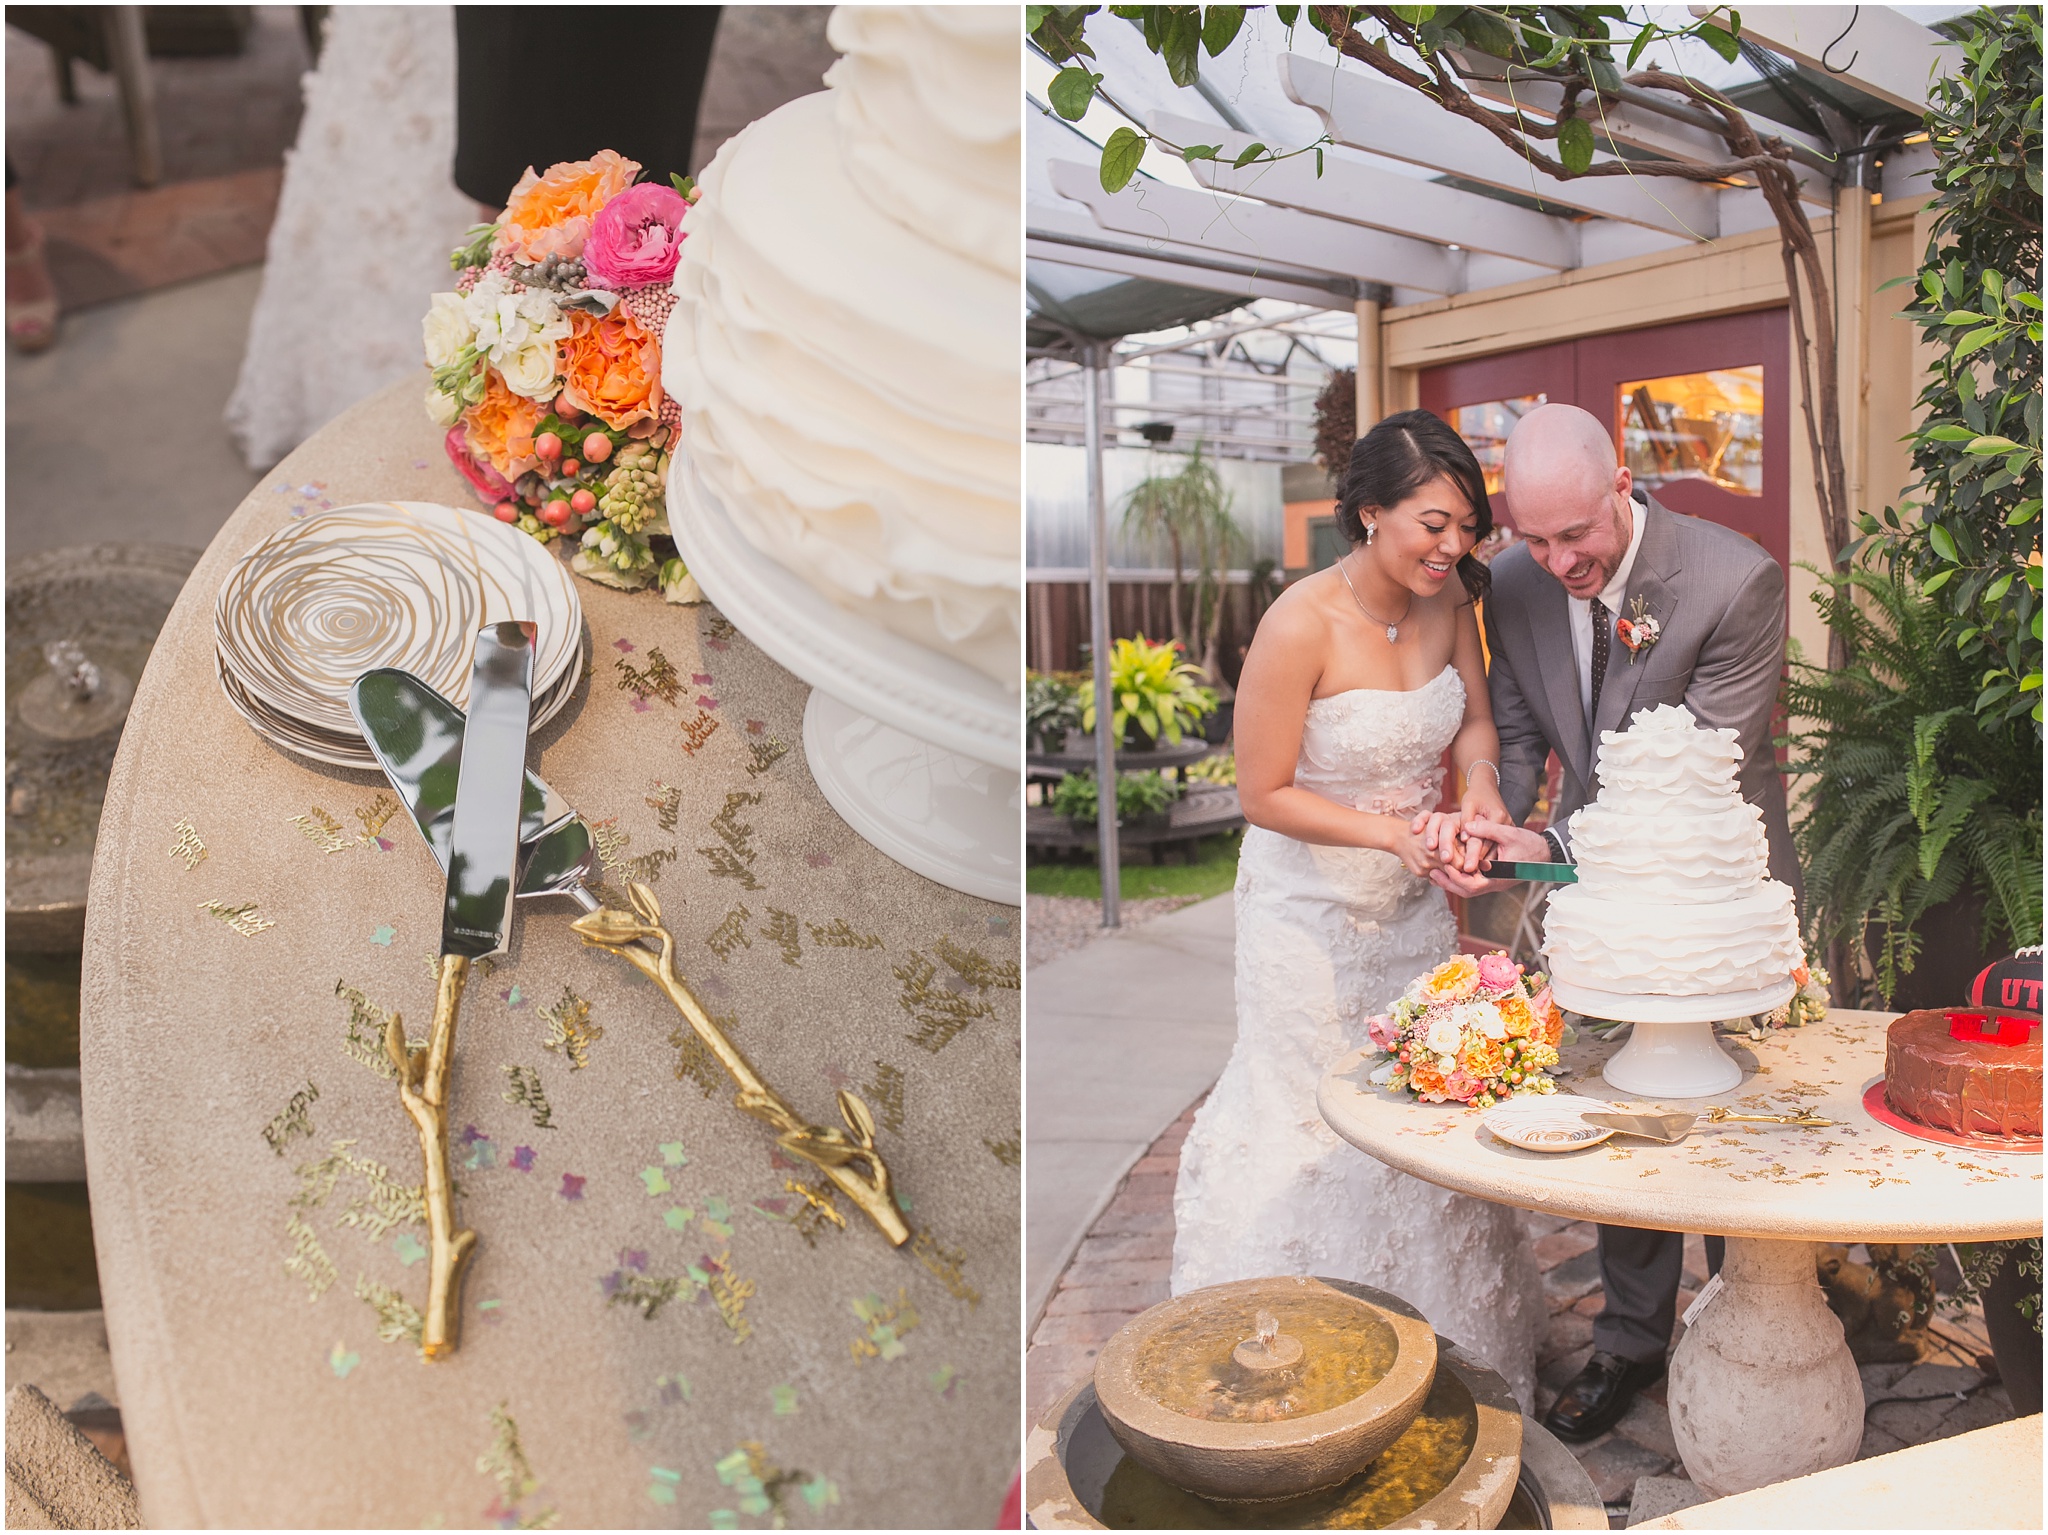 Log Haven, wedding cerimony, peach, coral, Millcreek Canyon, Cactus and Tropicals, wedding photographer, Beka Price Photography